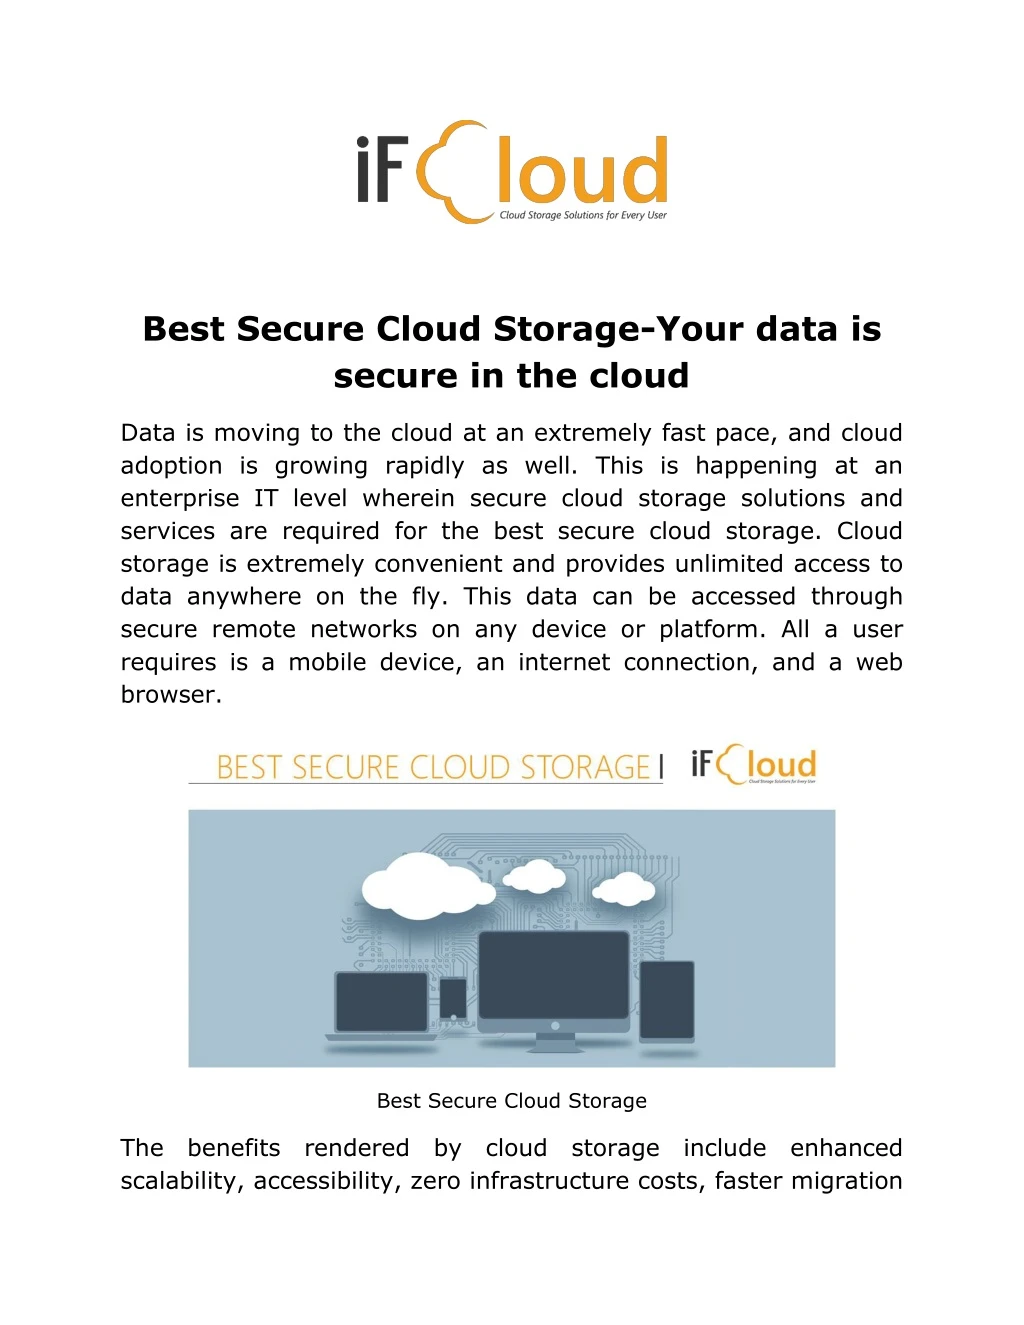 best secure cloud storage your data is secure